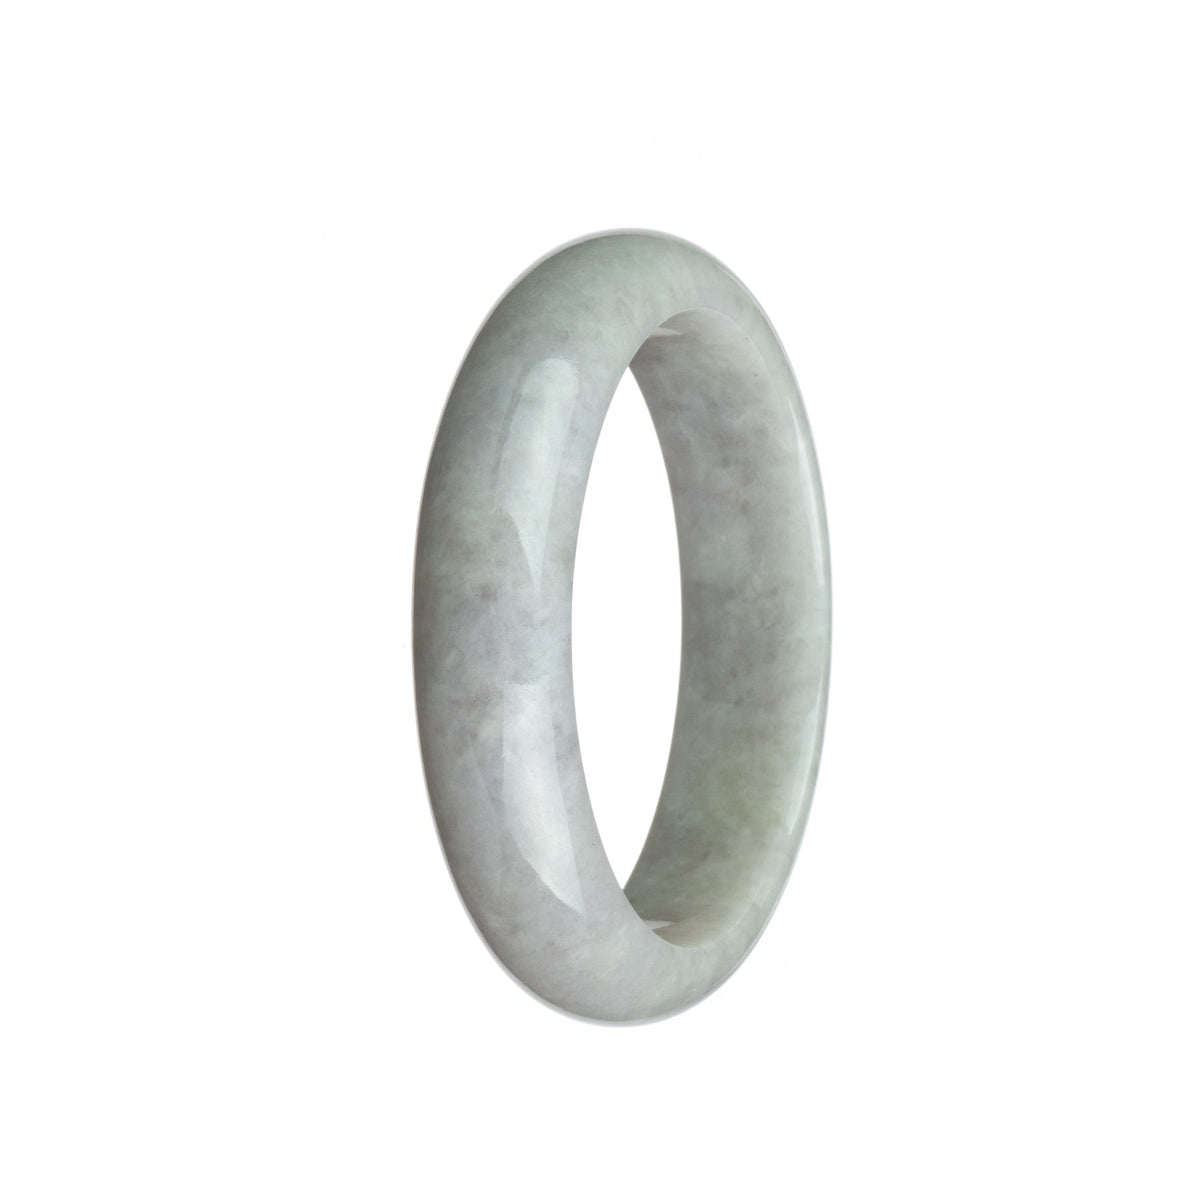 A lavender jadeite bangle with a half-moon design, crafted from high-quality Grade A jade.